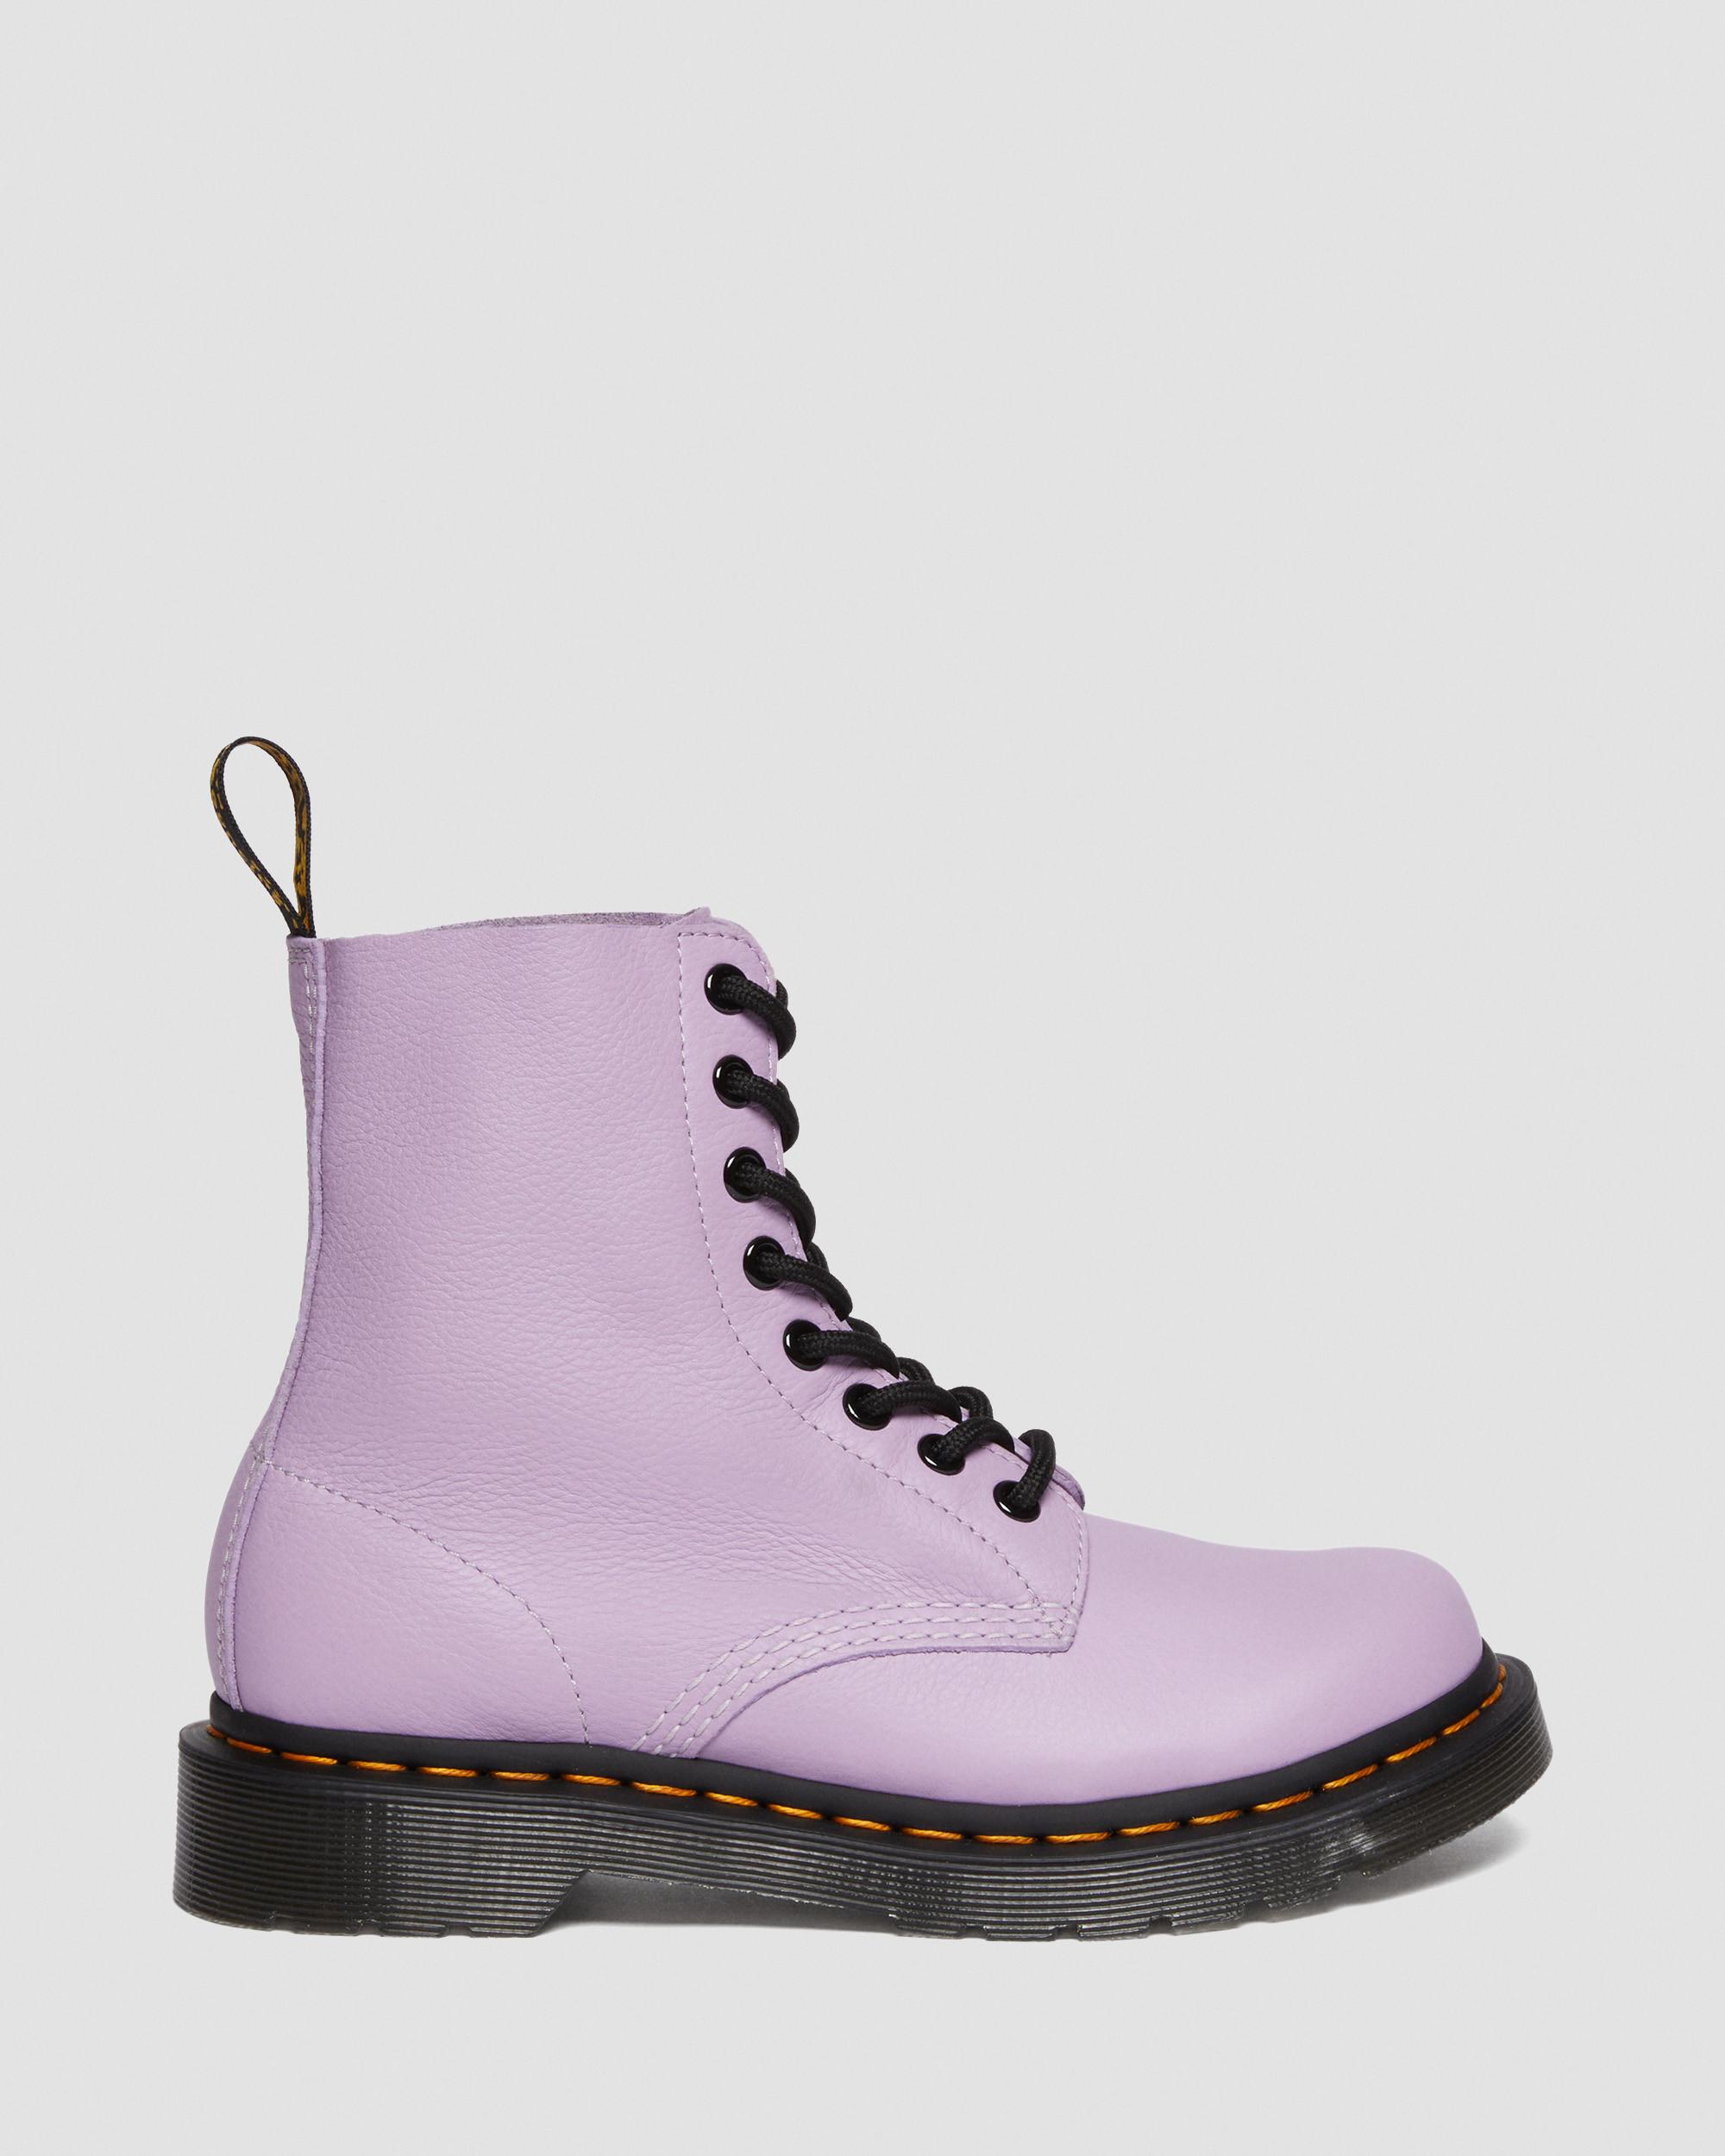 Lilac | in Black Up Eyelet Lace Boots Women\'s Pascal 1460 Dr. Martens